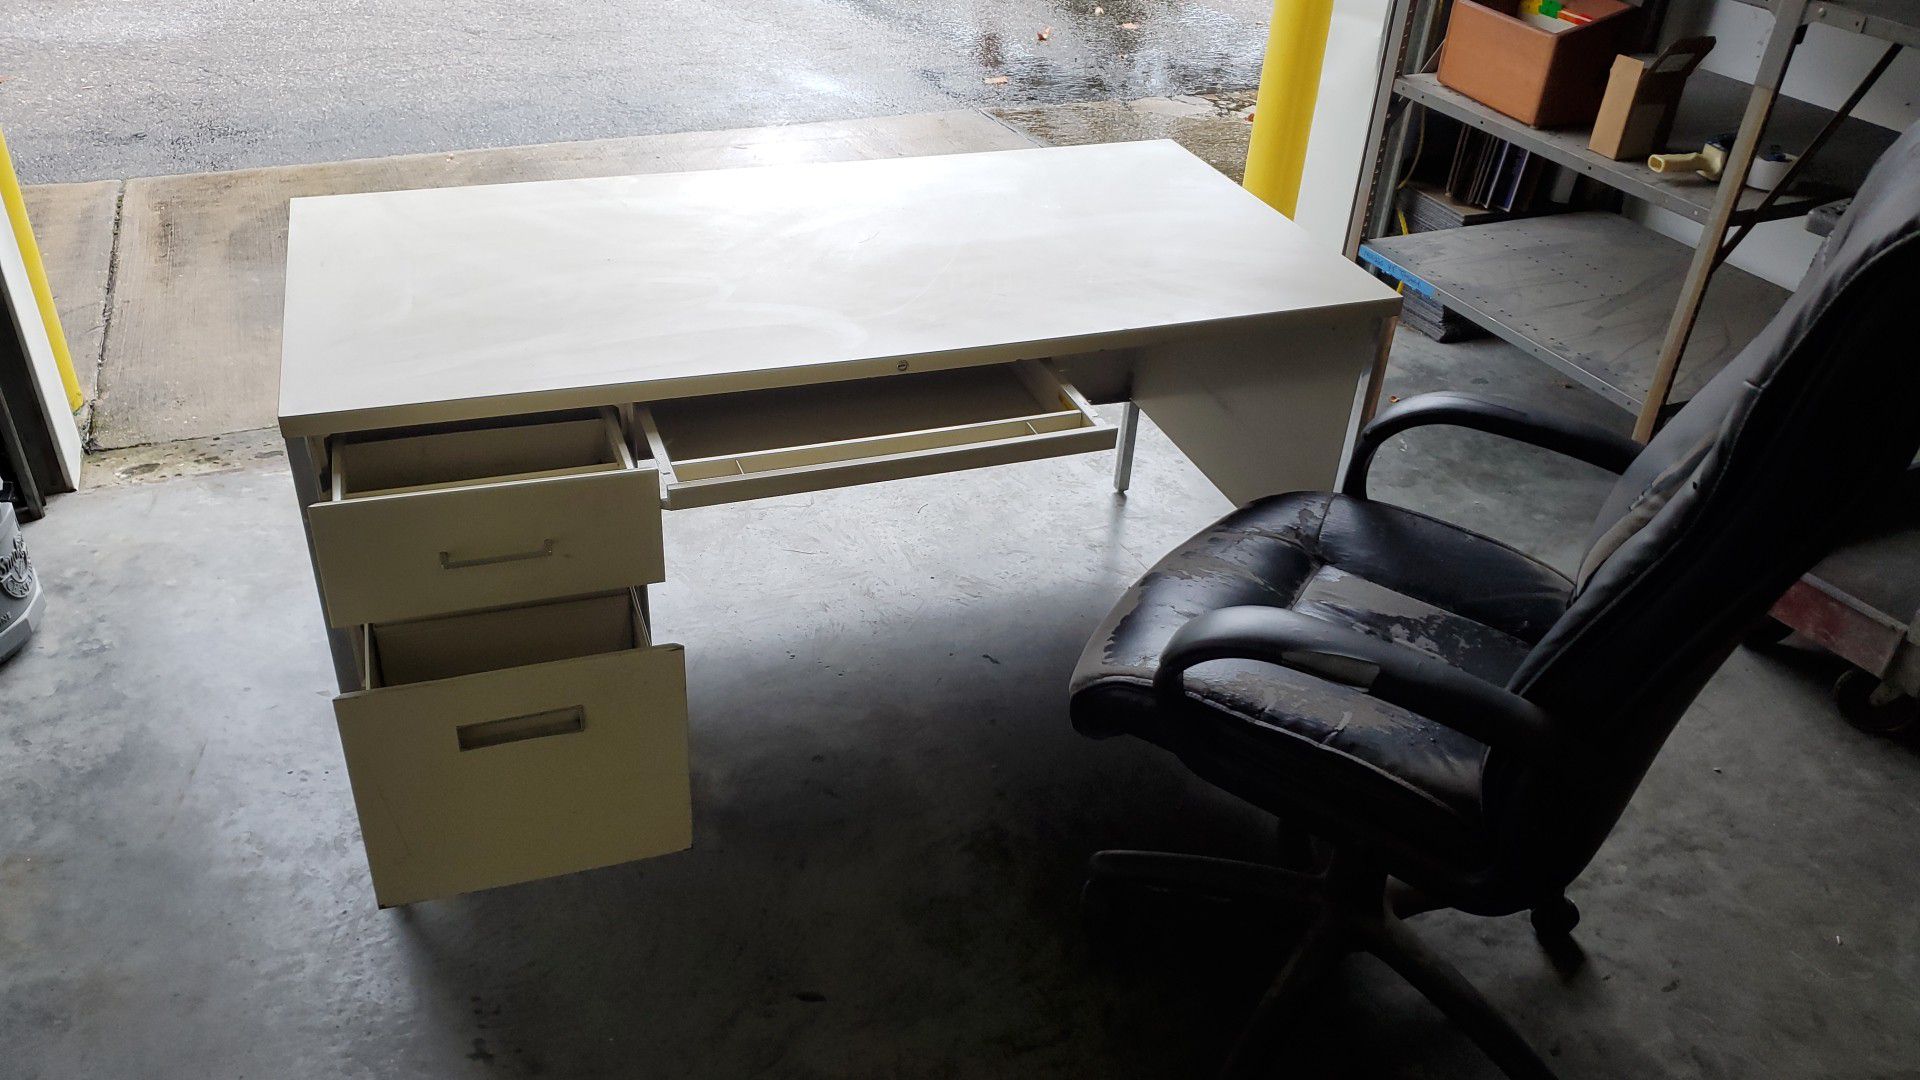 Office/warehouse desk and chair